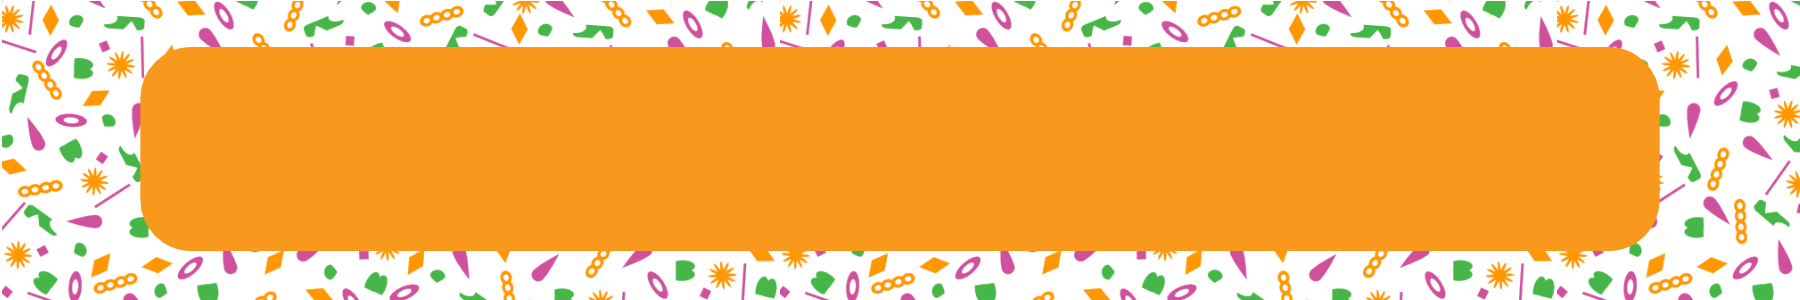 Haluna Happy Names signature happy orange provides a background for the page title in white. The orange rounded rectangle lays on a background of random pink green and orange shapes on a white background.